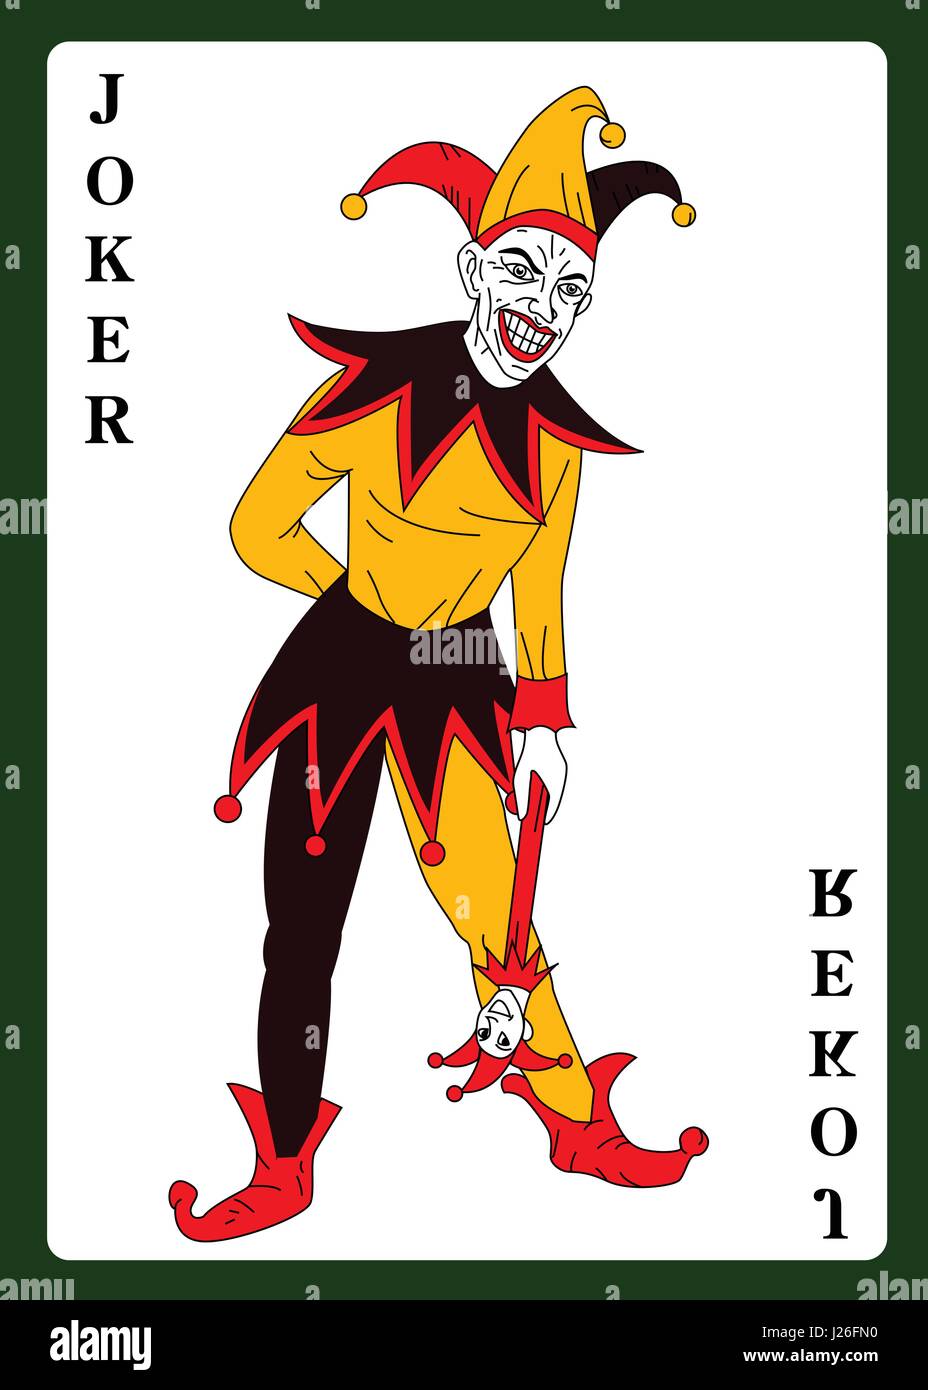 Joker Card High Resolution Stock Photography and Images - Alamy